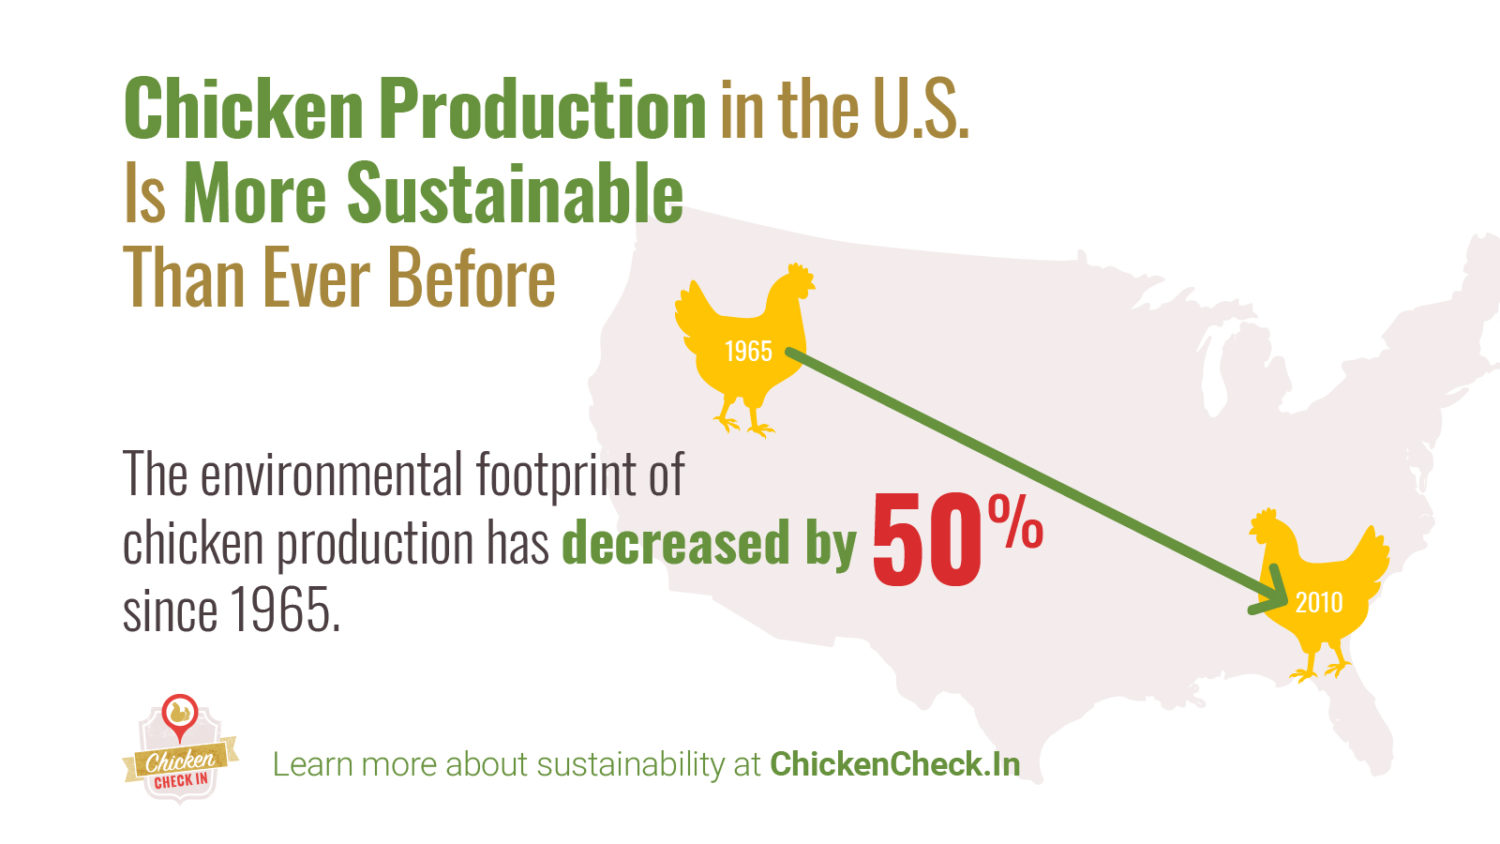 The Environmental Footprint of Chicken Production has Decreased by 50% since 1965.